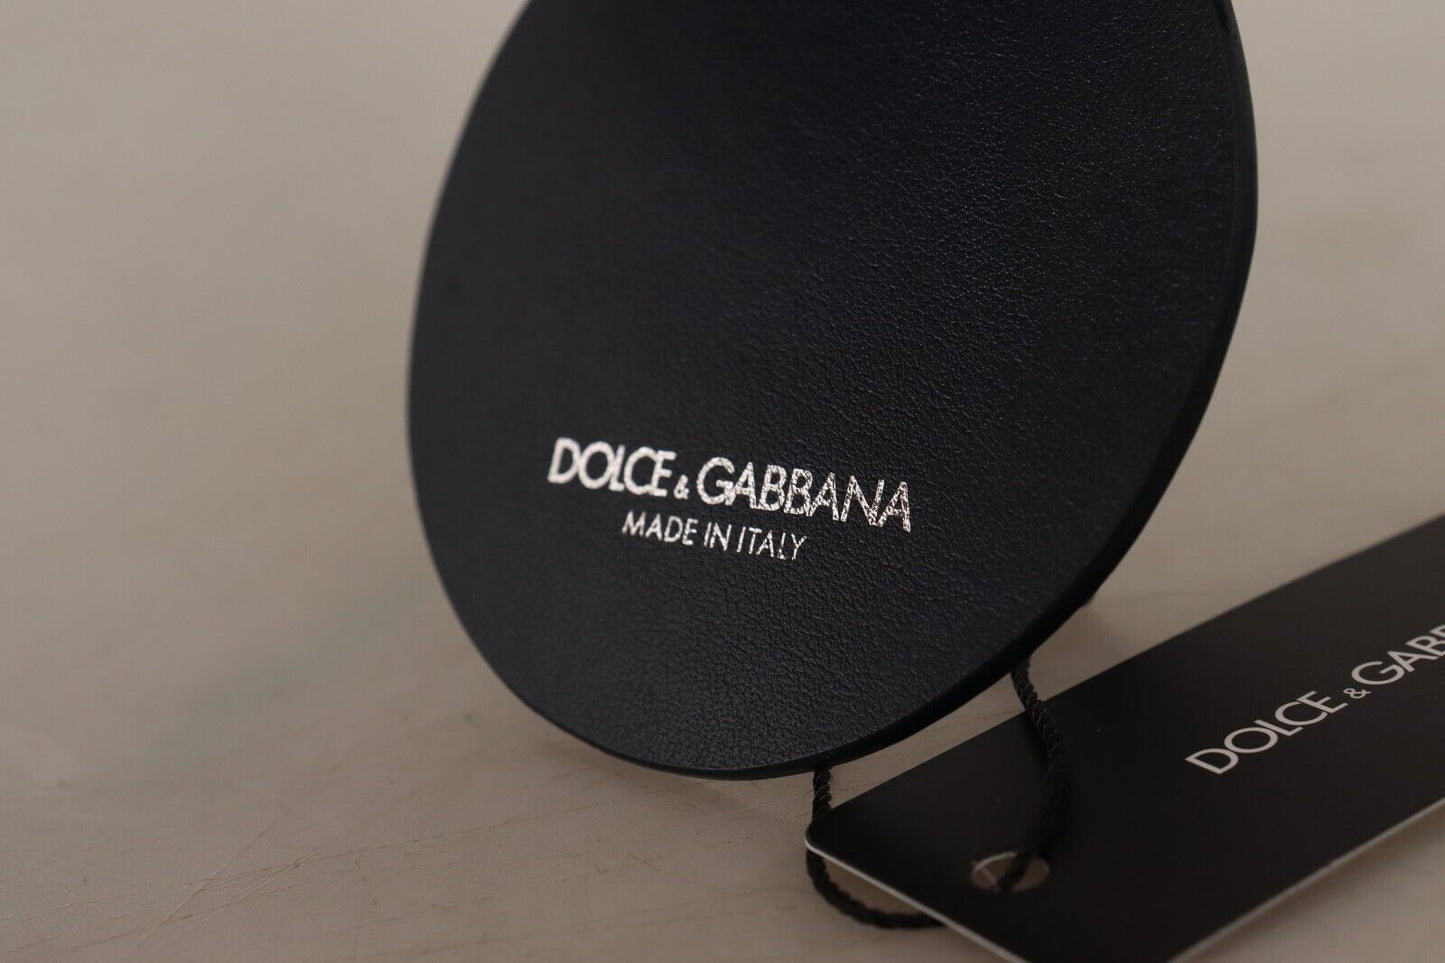 Dolce & gabbana black leather keychain with silver accents